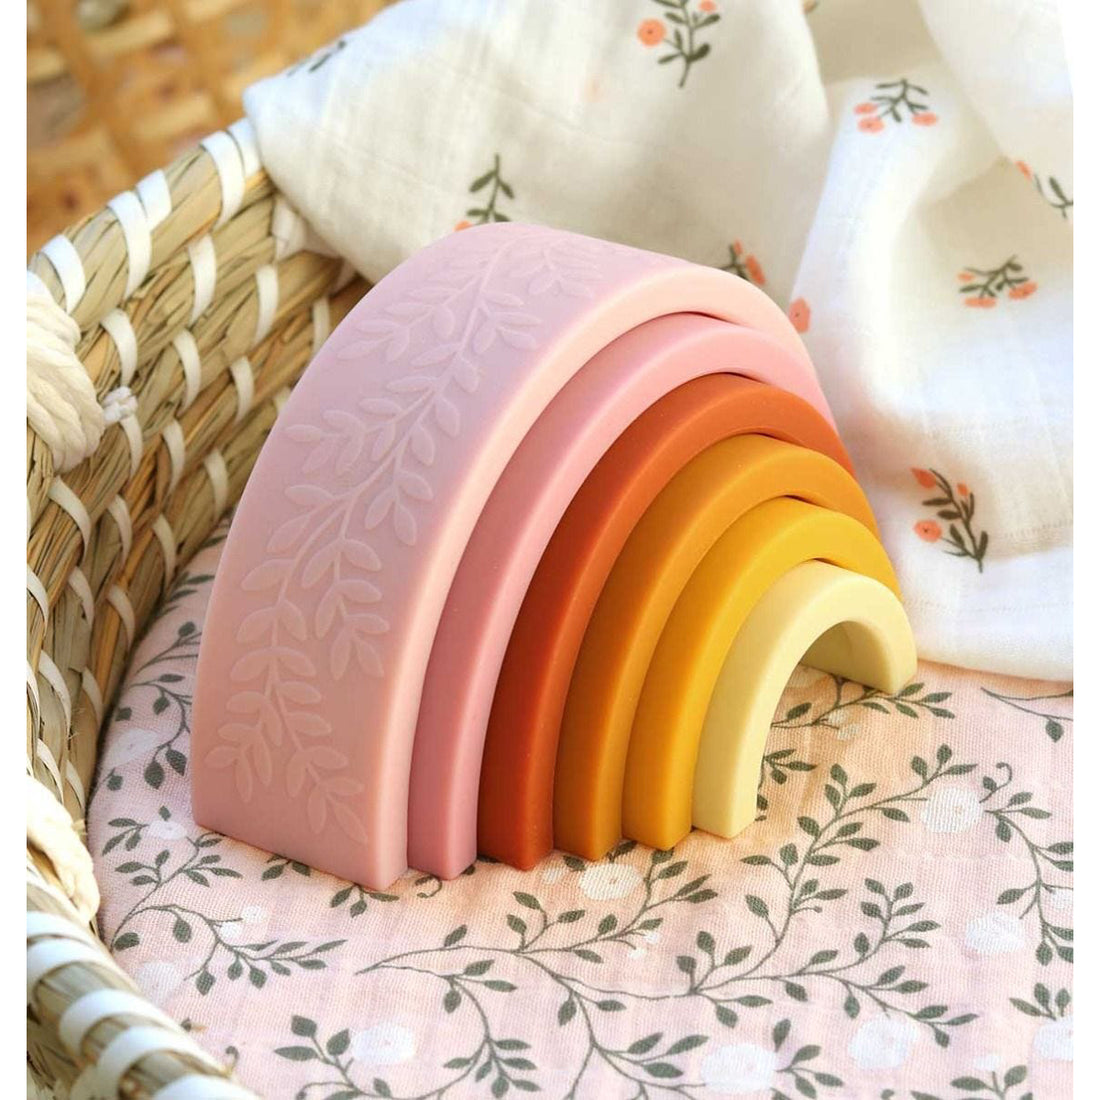 a-little-lovely-company-rainbow-stacking-toy-sunset-allc-sistsu01- (8)